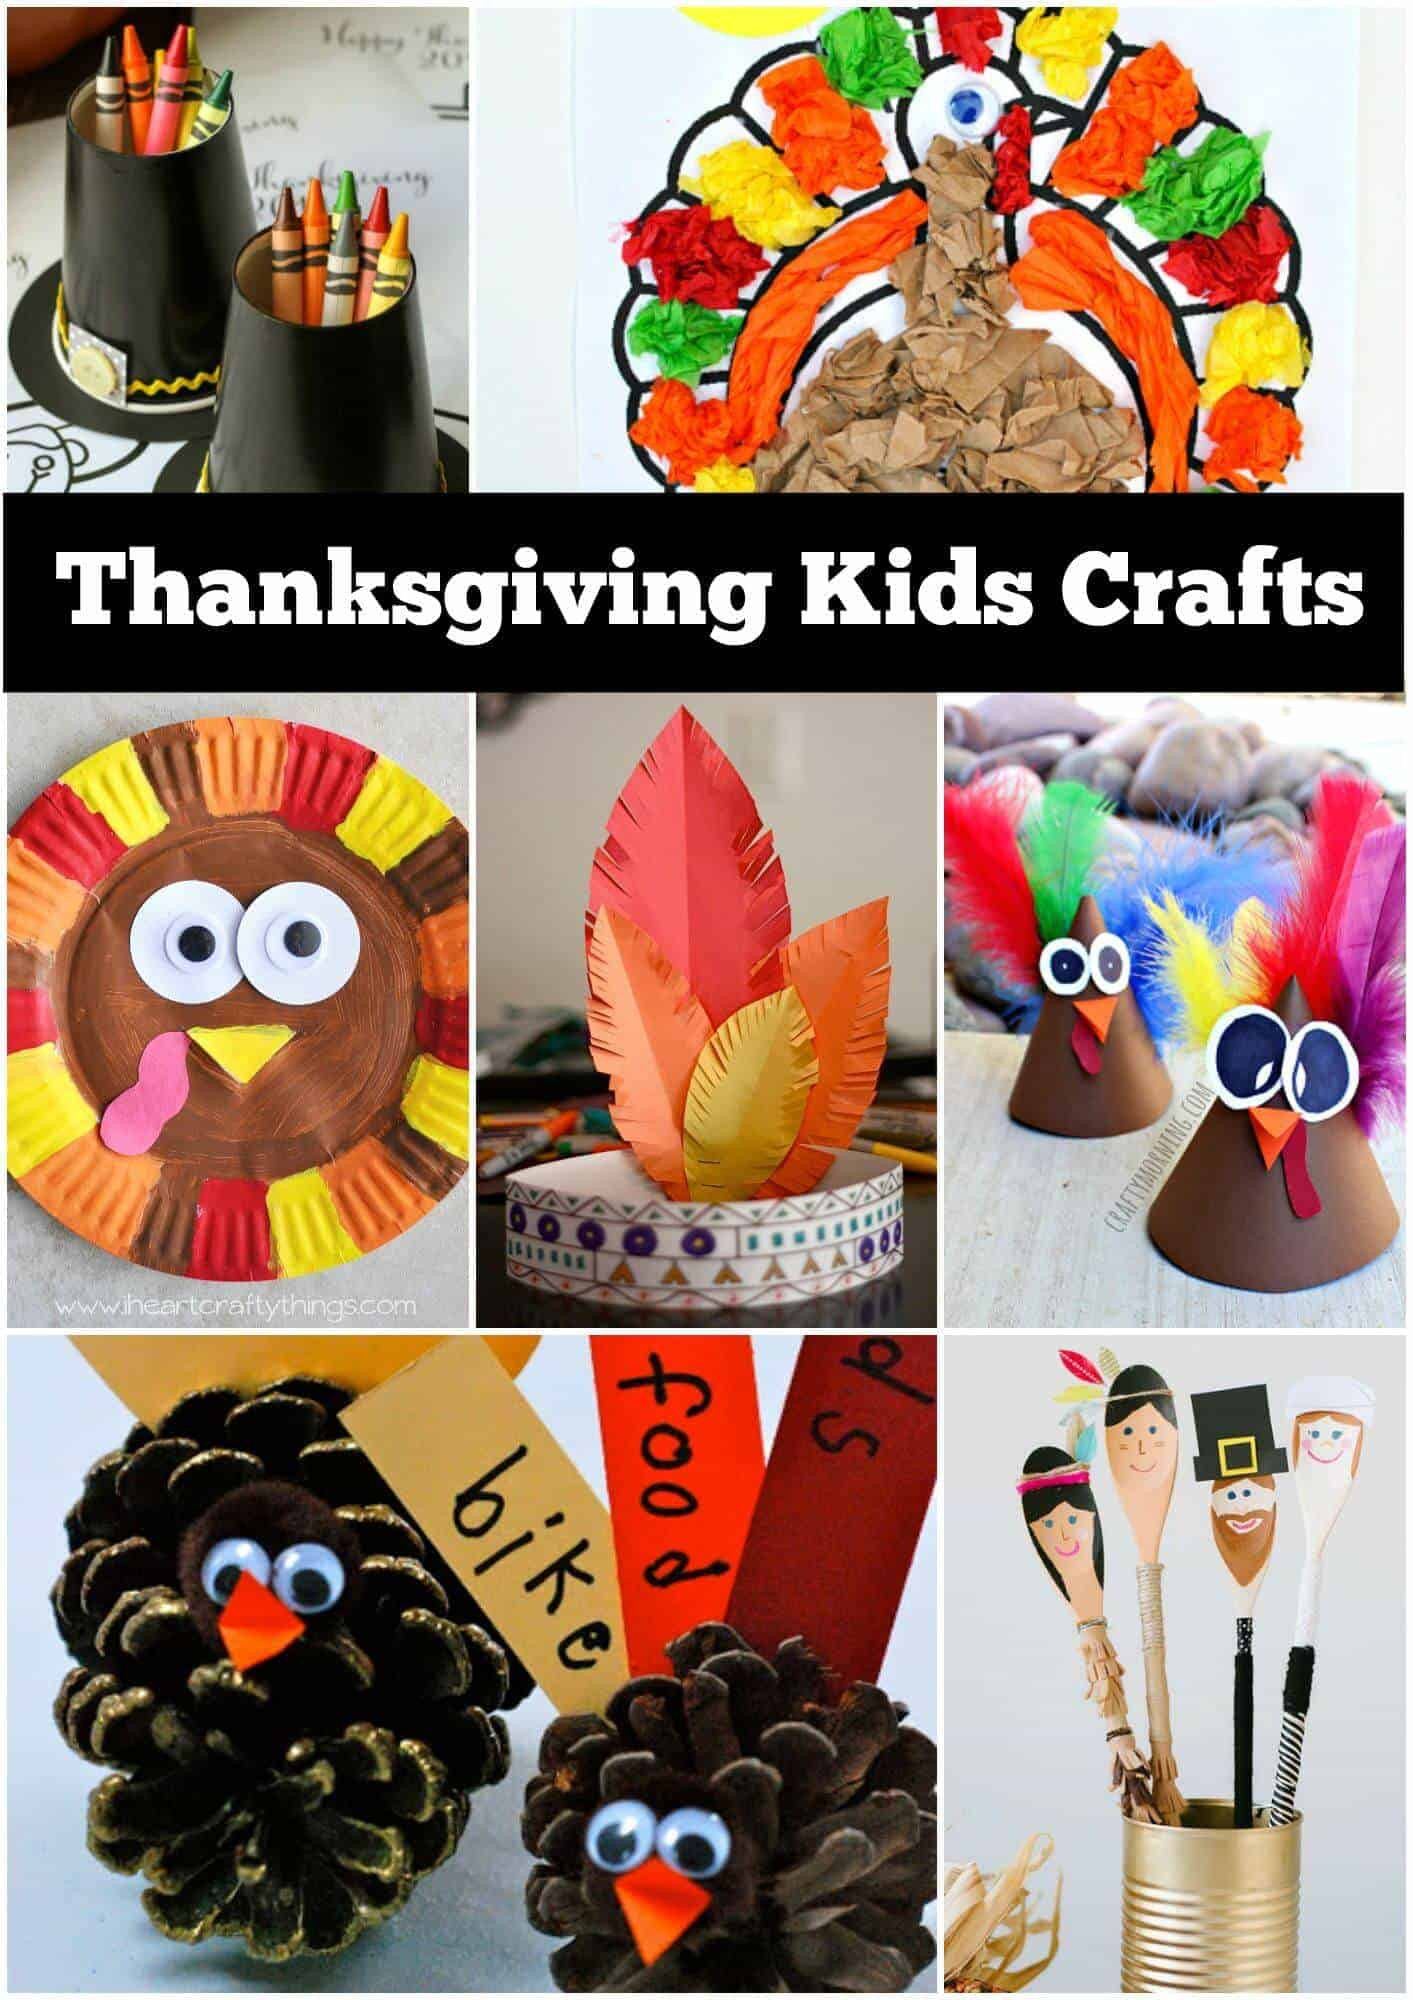 Craft Ideas For Toddlers
 12 Thanksgiving Craft Ideas for kids Page 2 of 2